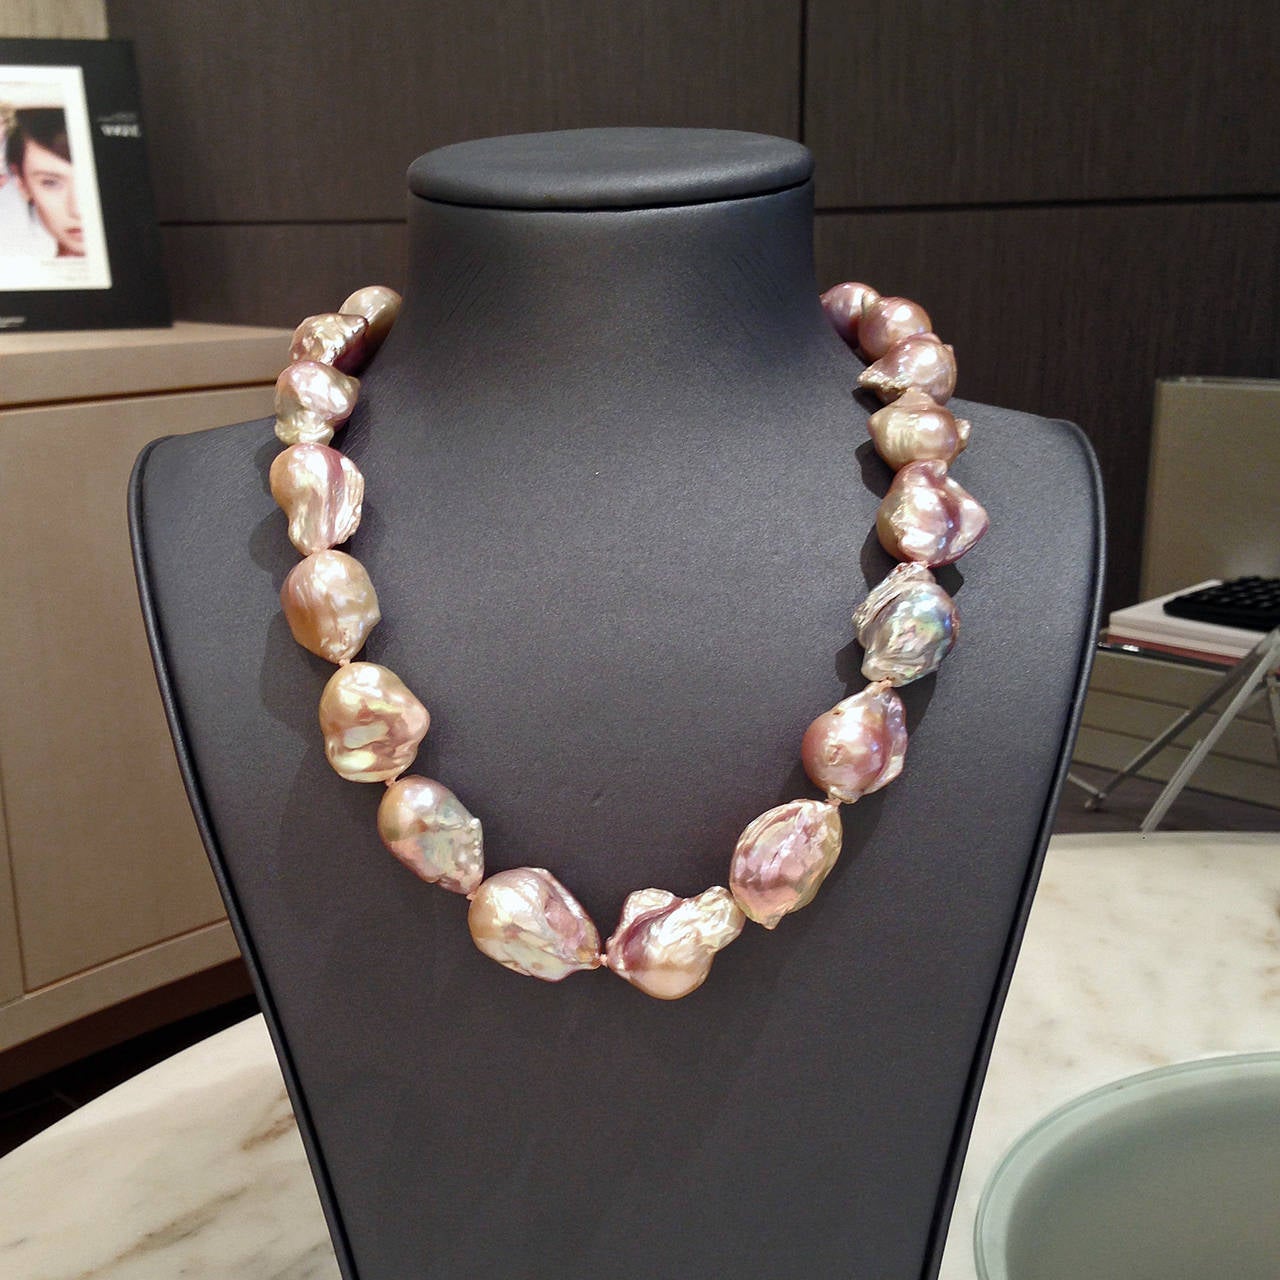 Necklace handcrafted and strung with an 18k yellow gold toggle clasp and 21 spectacular pink, purple, and blue baroque pearls averaging 18mm x 20mm in size. Nucleated freshwater pearls from China, the combination of their fantastic natural color,